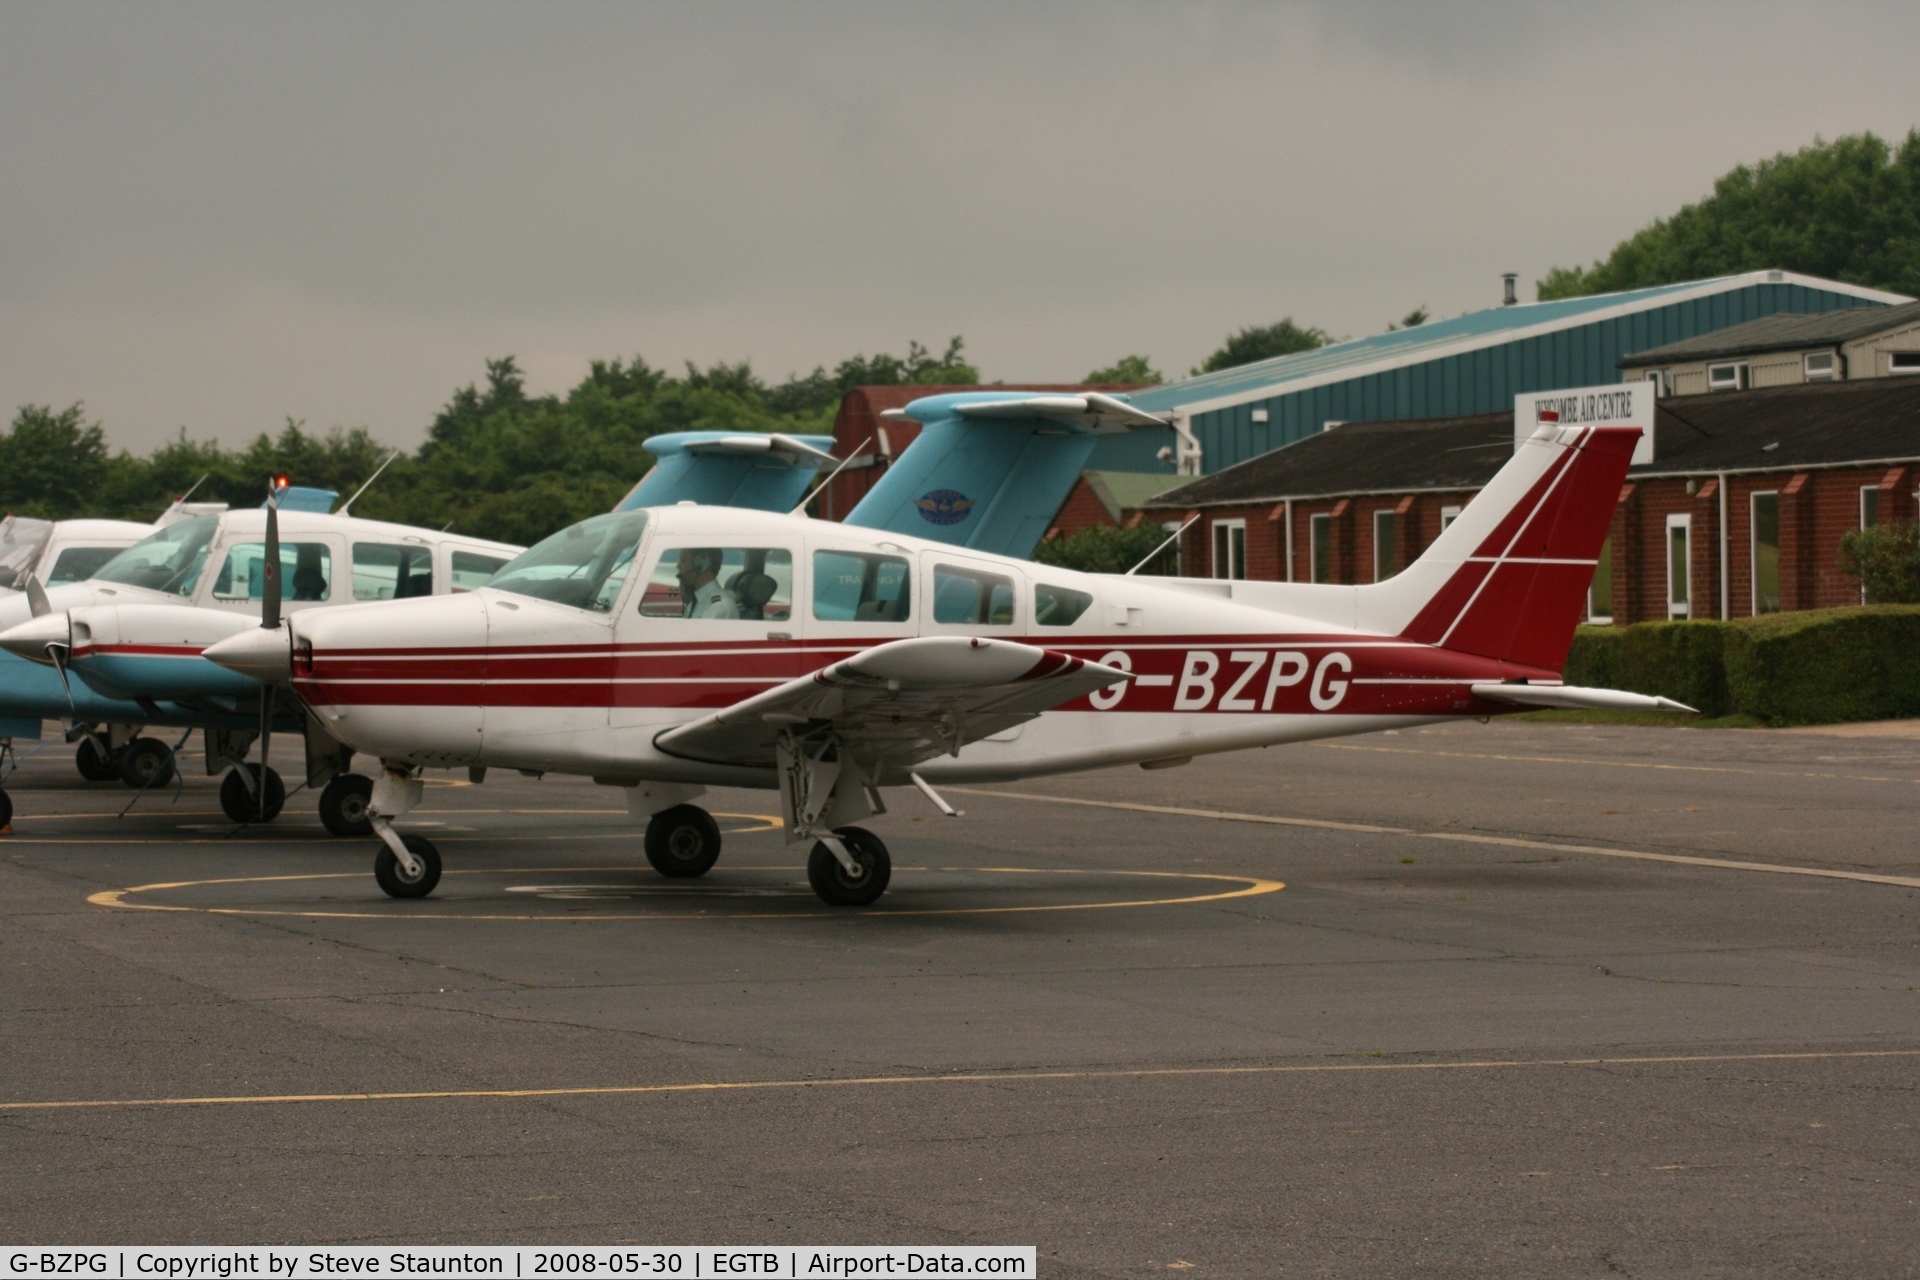 G-BZPG, 1978 Beech C24R C/N MC-556, Taken at Wycombe Air Park using my new Sigma 50 to 500 APO DG HSM lens (The Beast)